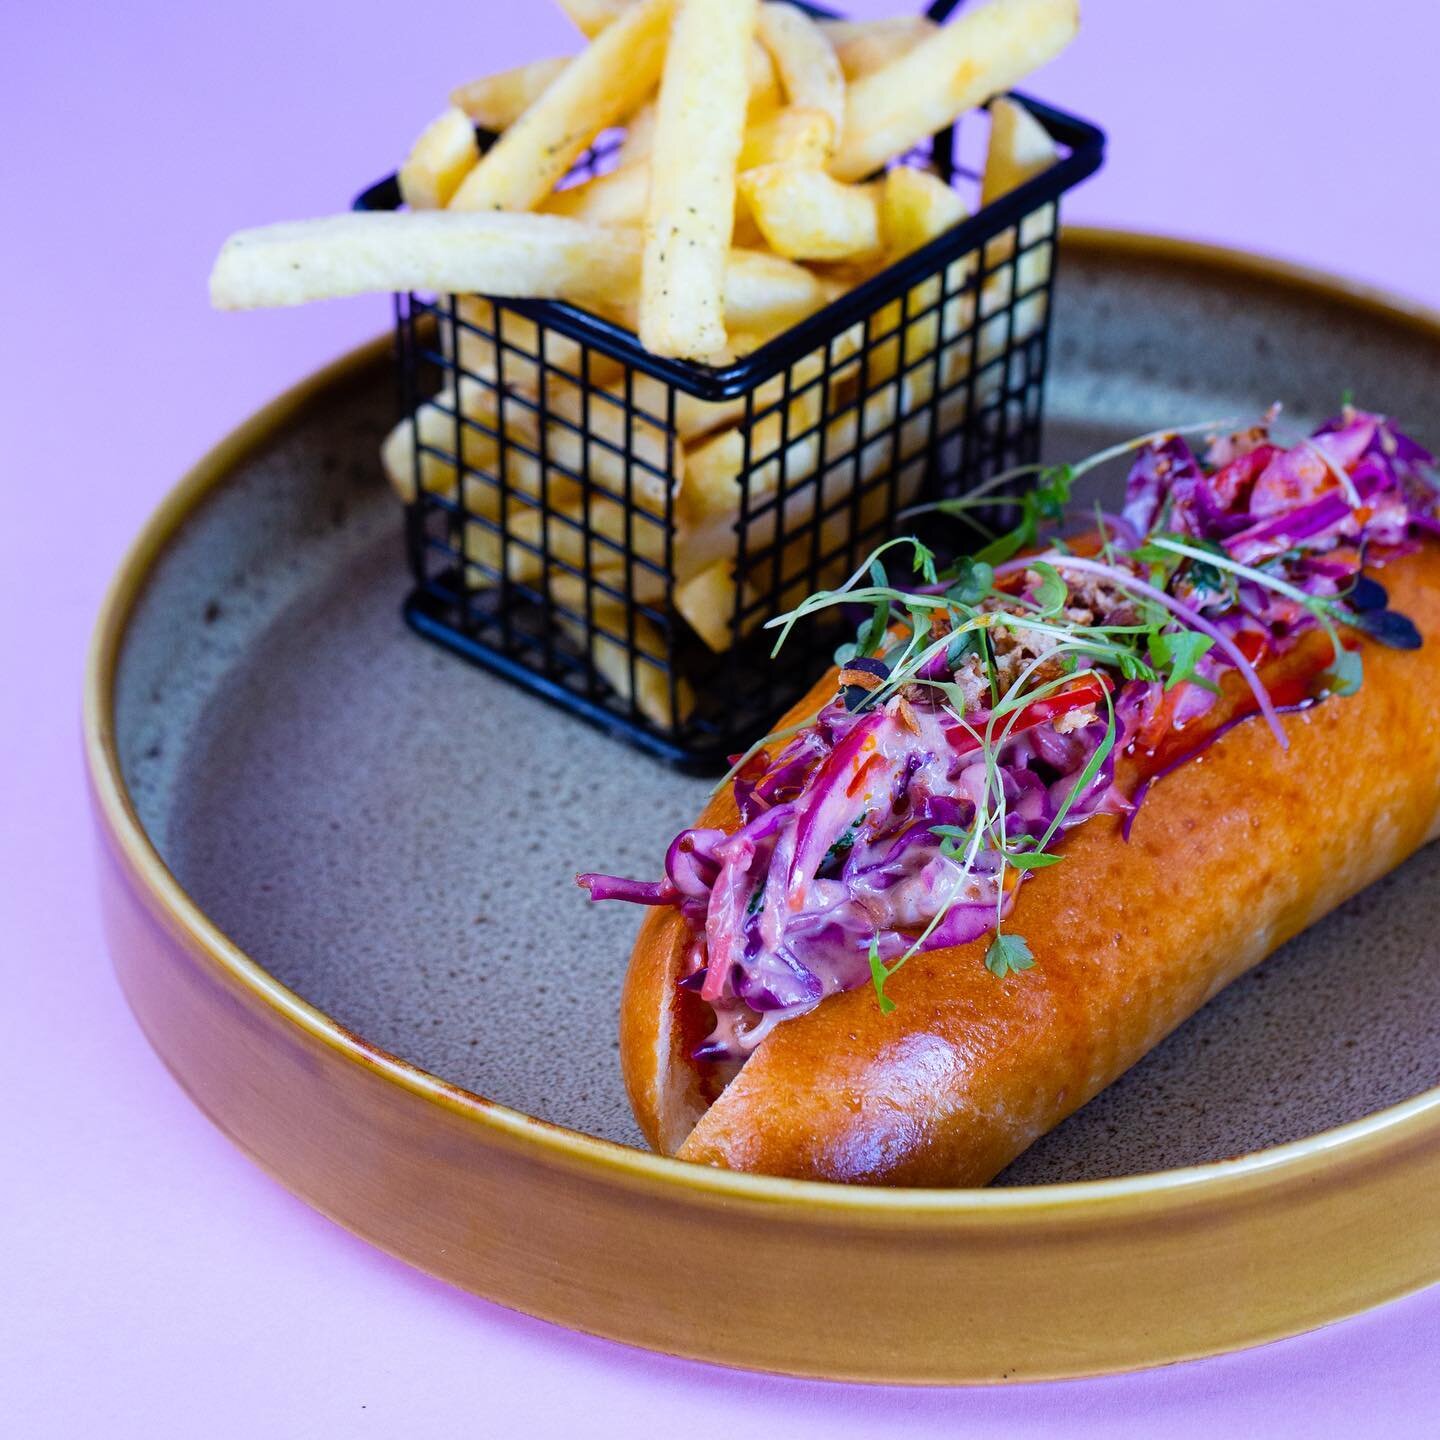 🦞LOBSTA🦞Lobster Tail, Brioche Roll, Chilli, Pickled Asian Veg, Coriander, Thousand Island Sauce with a side of everyone&rsquo;s favourite Fries ✨

📍129 Church St Brighton 
(03)9592 8305
7 days a week from 7am 
Book now - link in bio 

.
.
 #bright